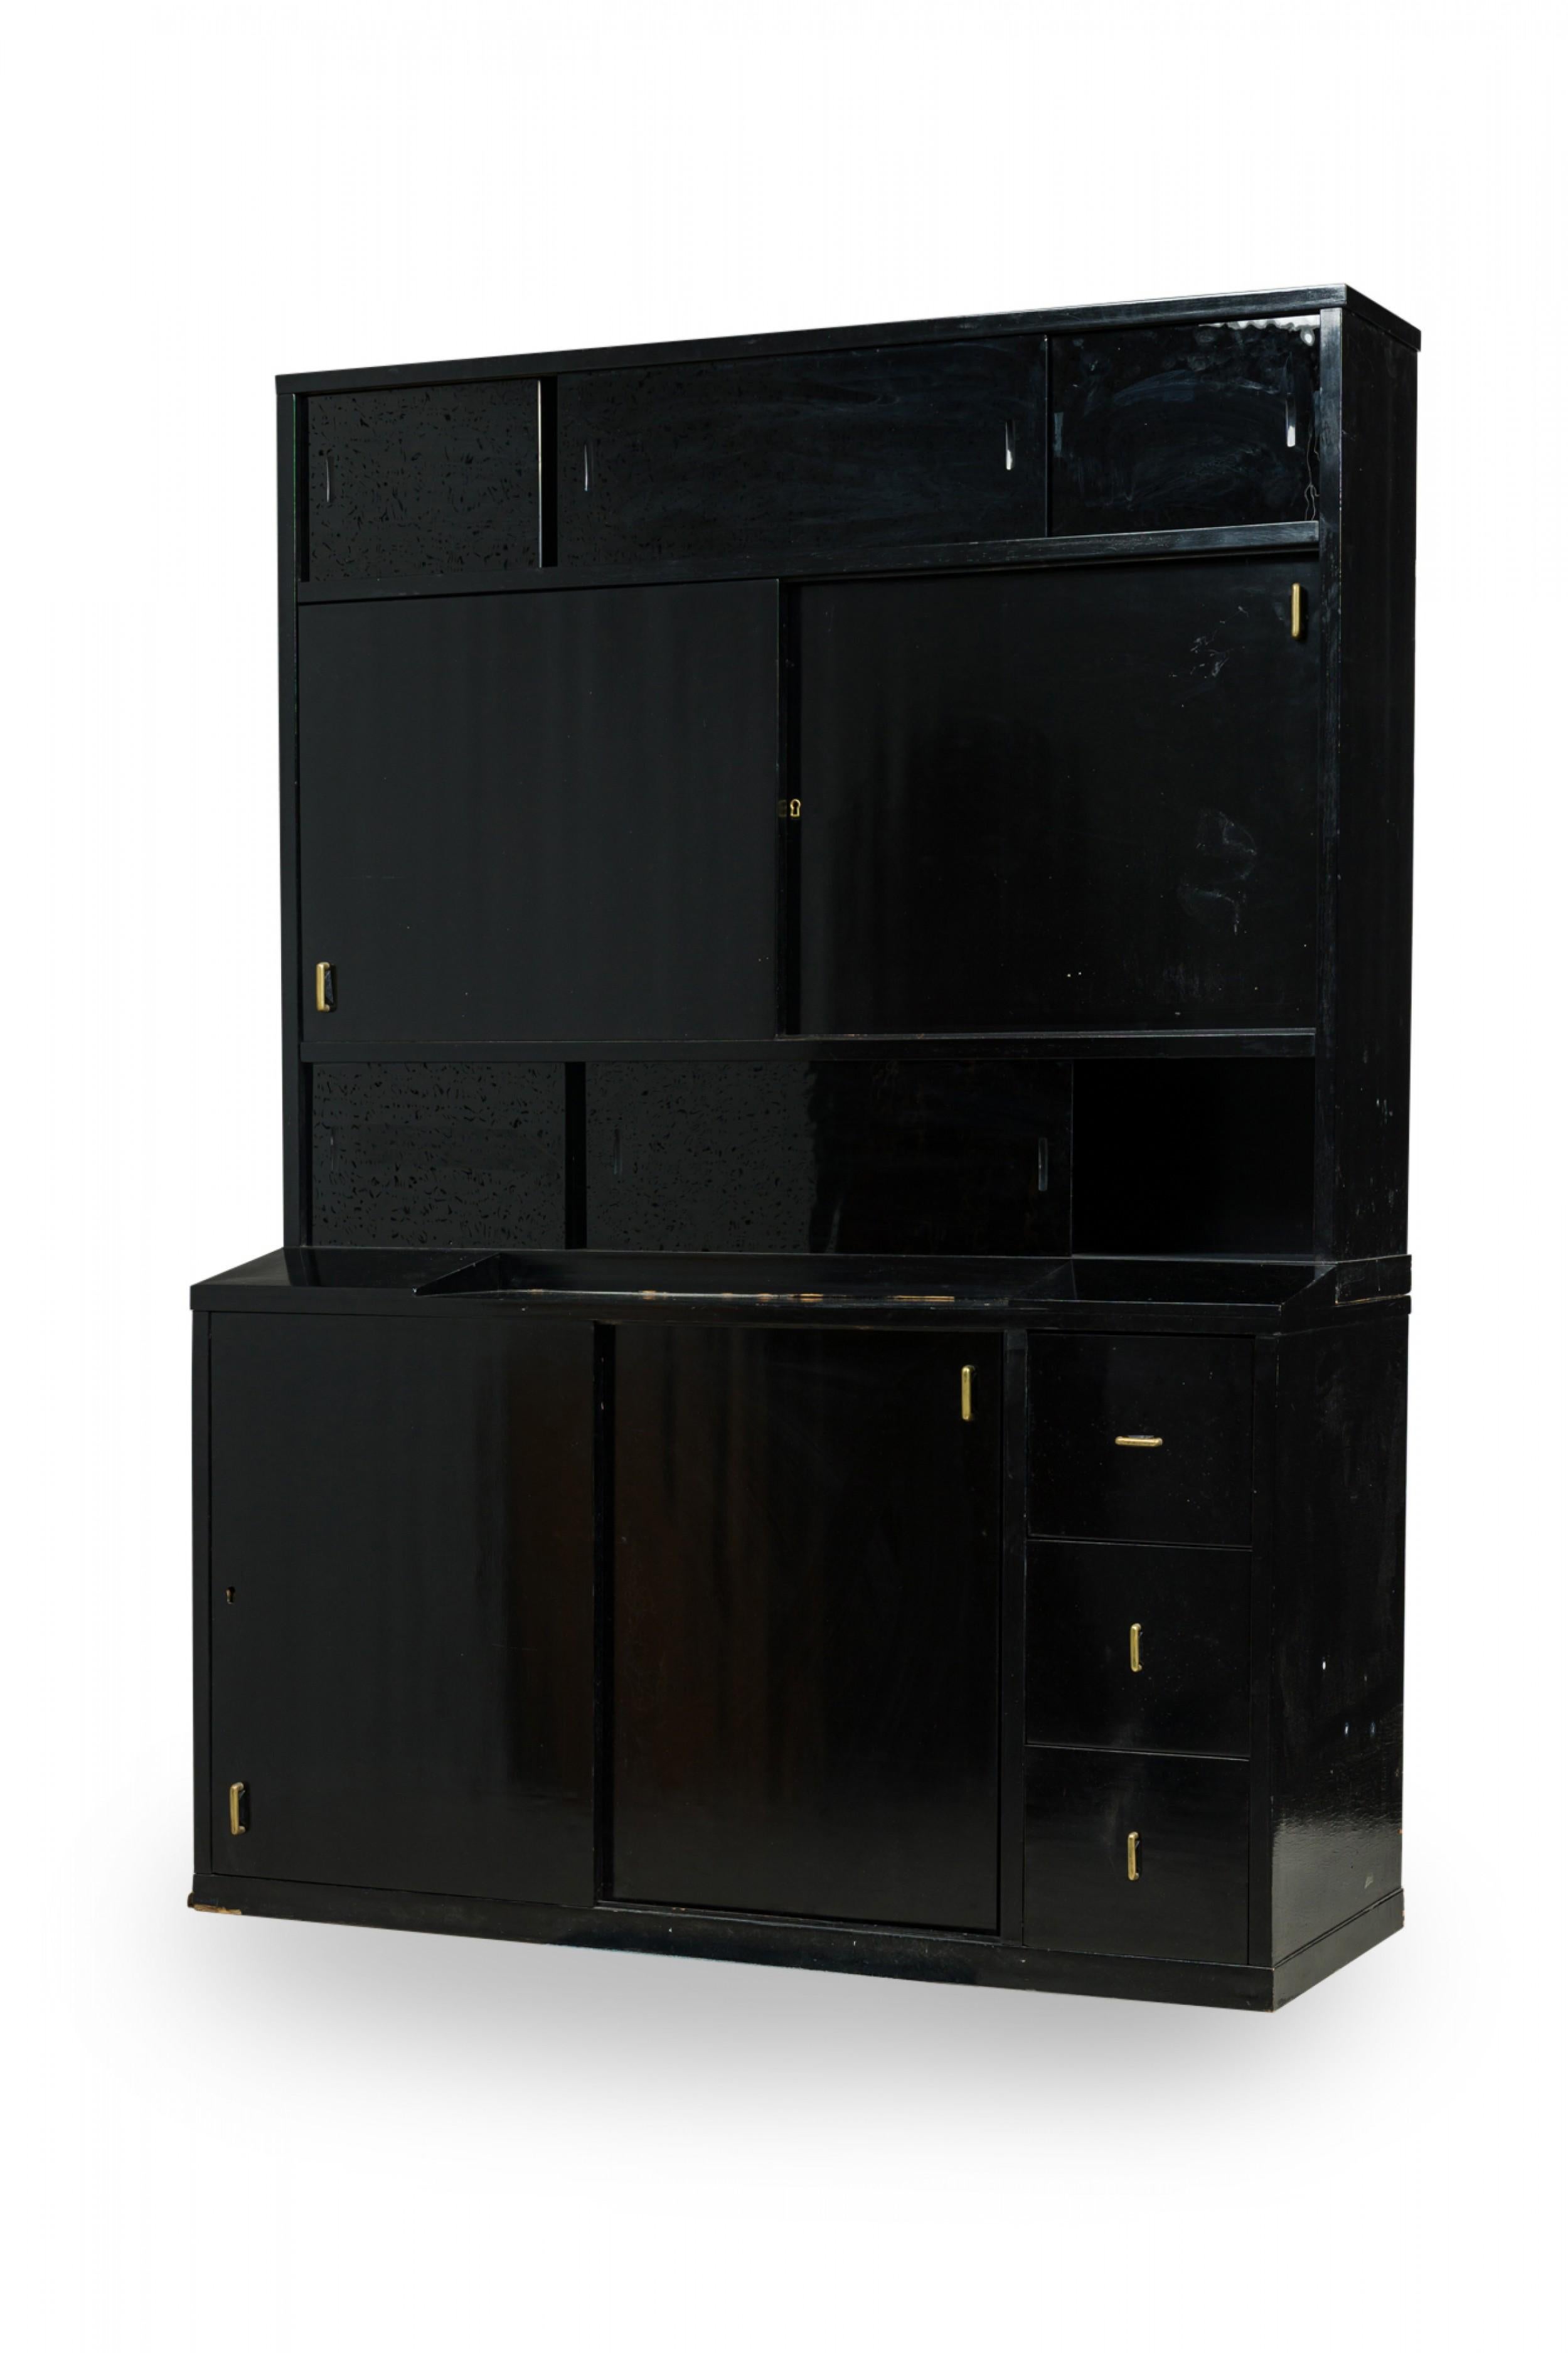 French Art Deco (1925) ebonized two-piece cabinet with the bottom section containing two large sliding doors flanked on the right by three smaller drawers and the top section having central sliding door compartment with black glass sliding door